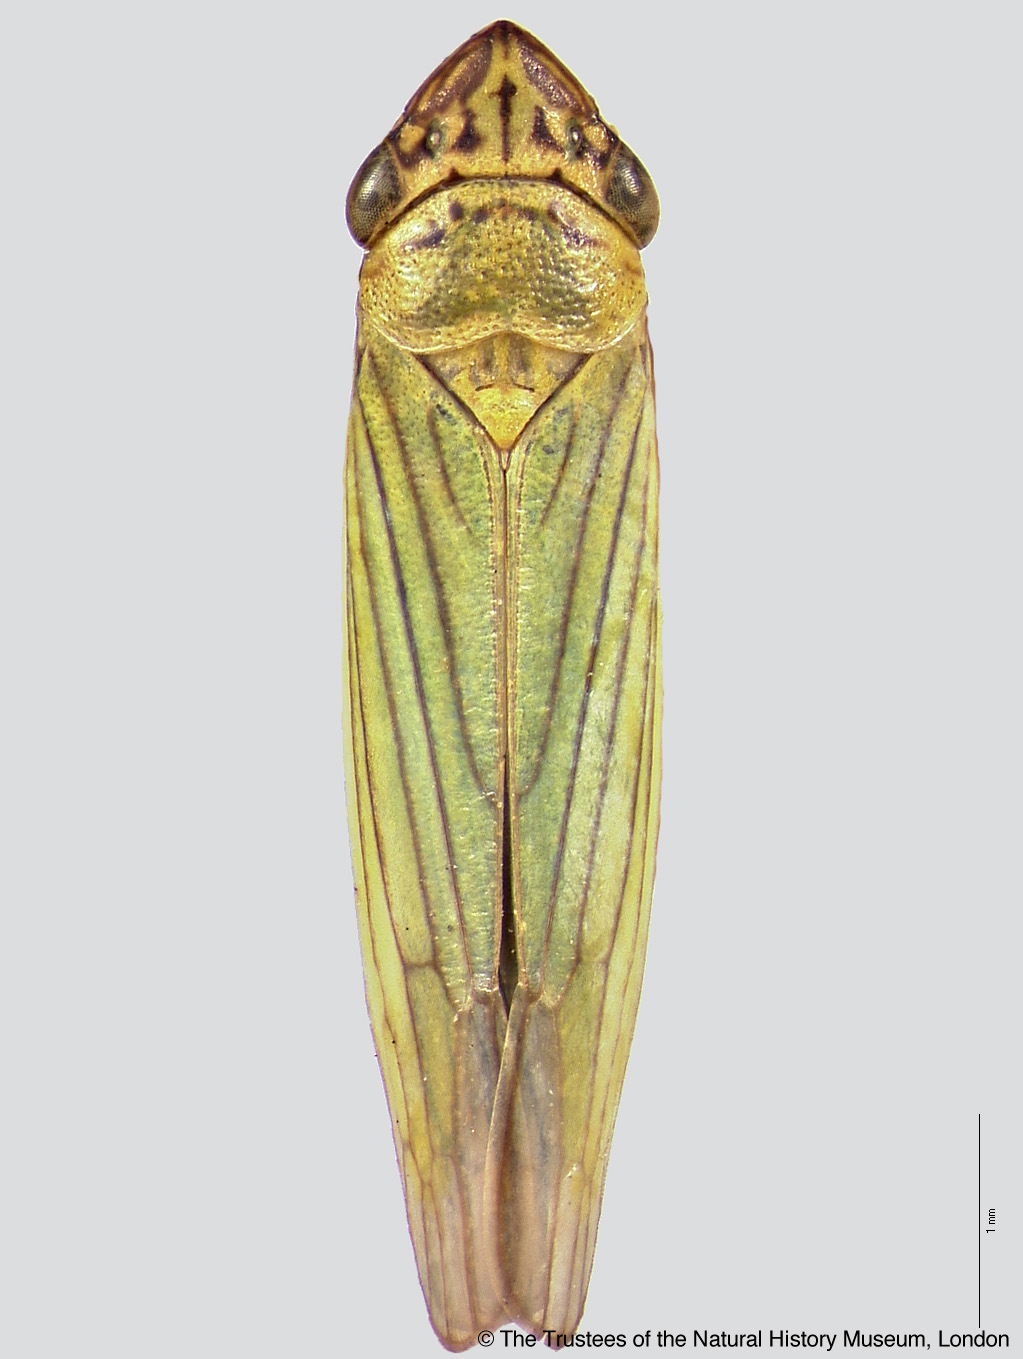 Sharpshooter Leafhoppers | Syncharina argentina (Berg 1879d: 251)